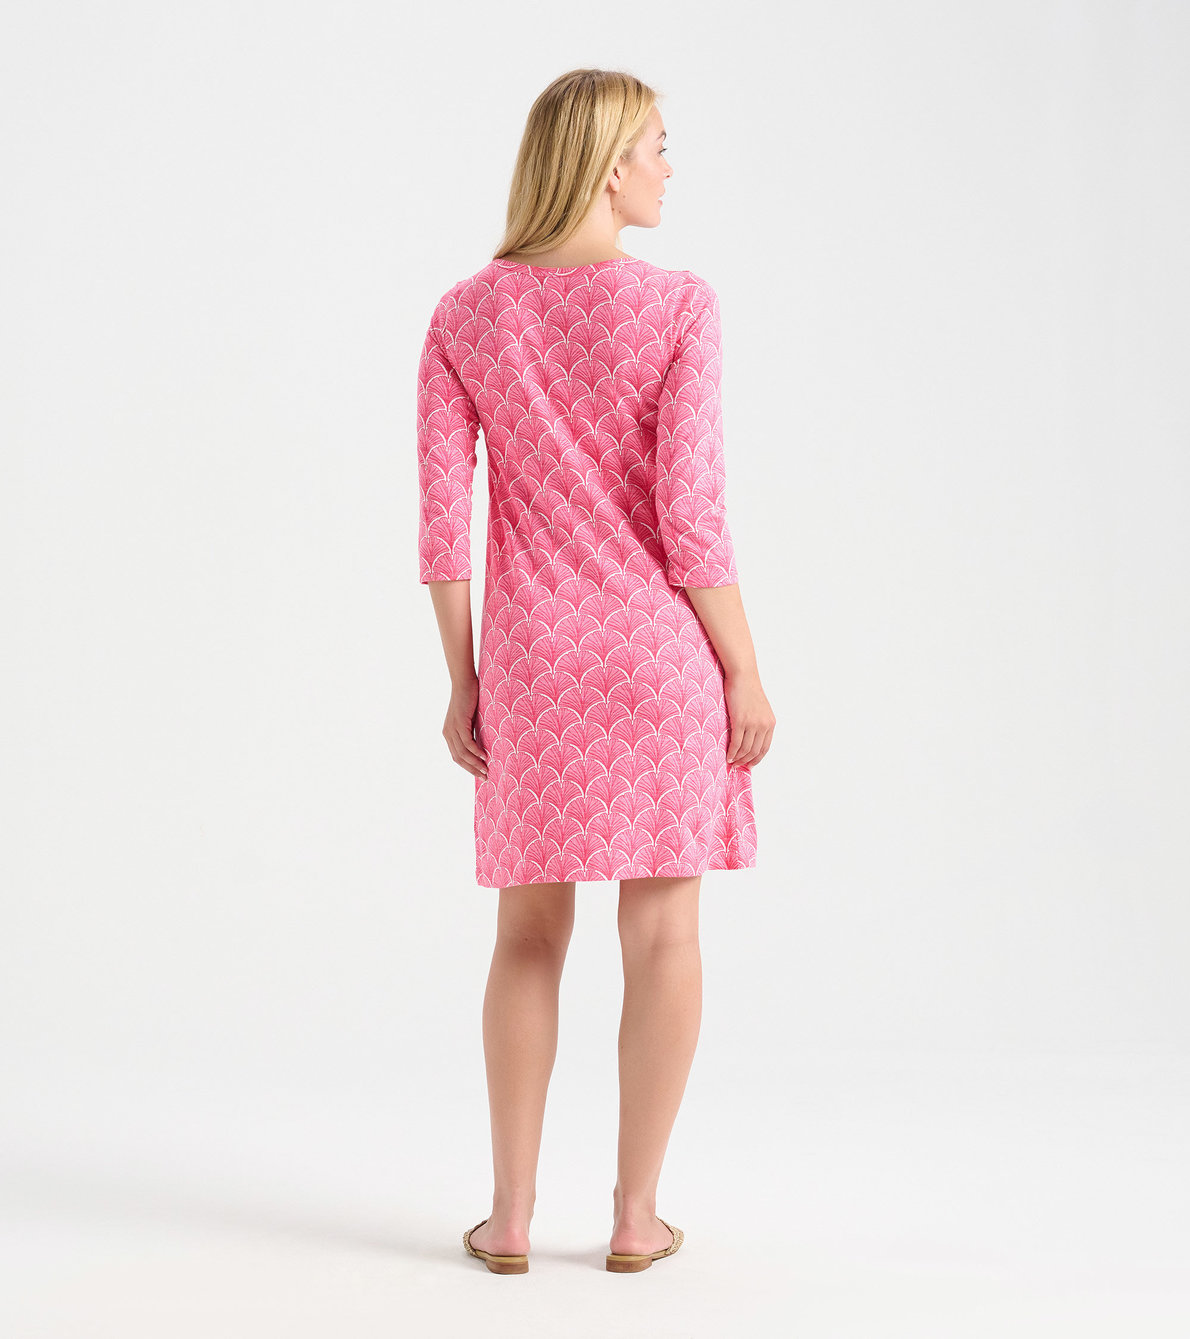 View larger image of Women's Coral Fans 3/4 Sleeve Summer Dress